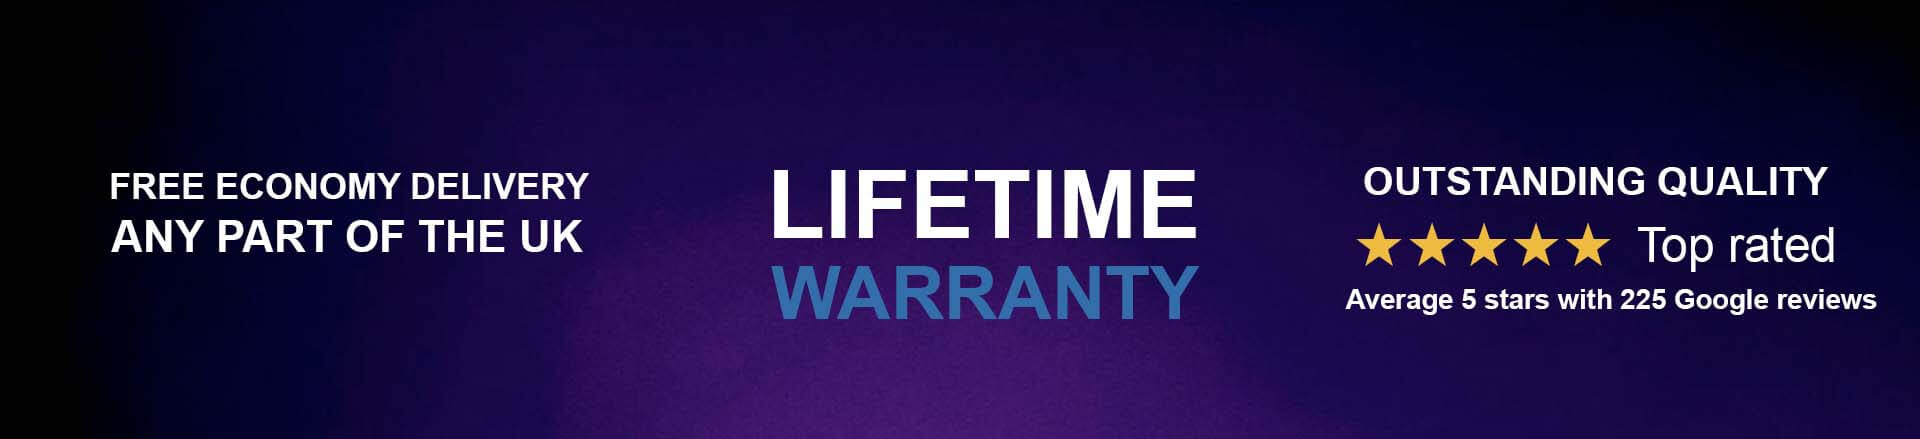 Wall Bed King: liteme warranty, free delivery, top rated, outstanding quality